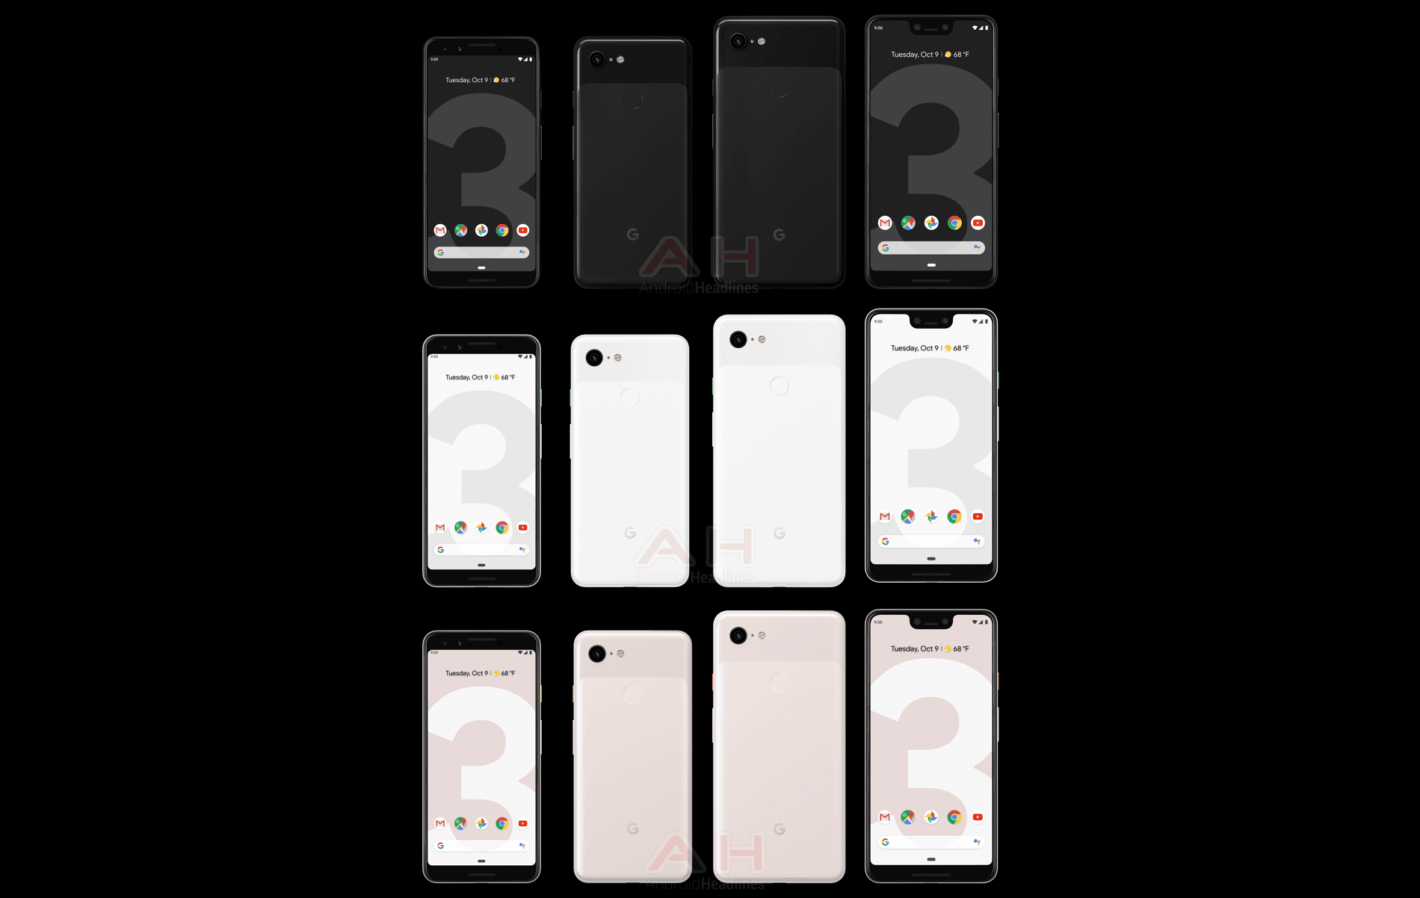 Google-Pixel-3-and-Google-Pixel-3-XL-Androidheadlines-2018-1420x898.png